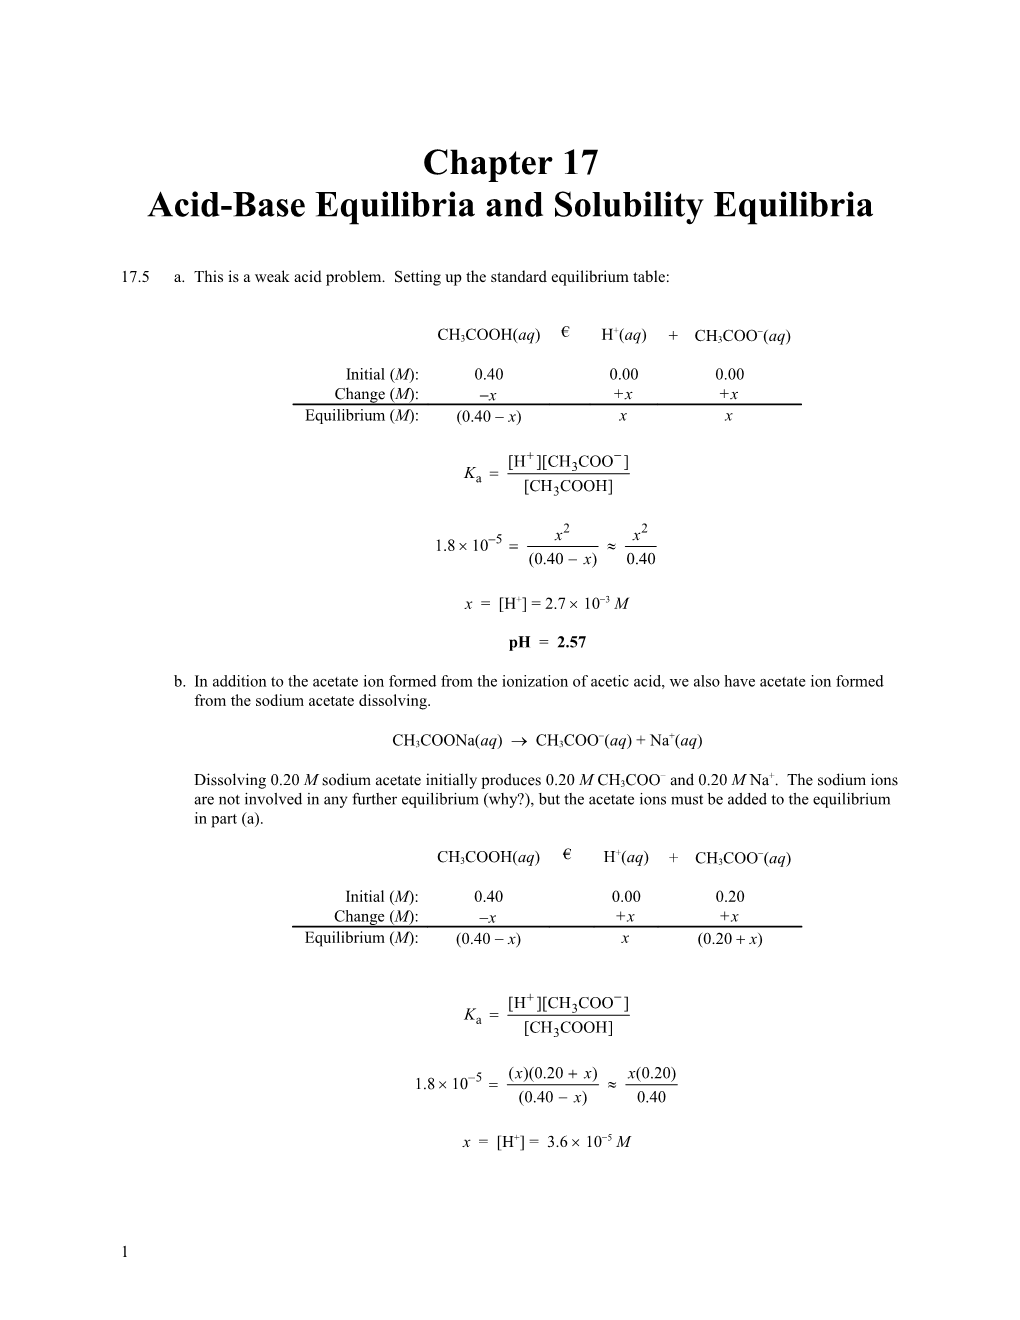 Chapter 17: Acid-Base Equilibria and Solubility Equilibria